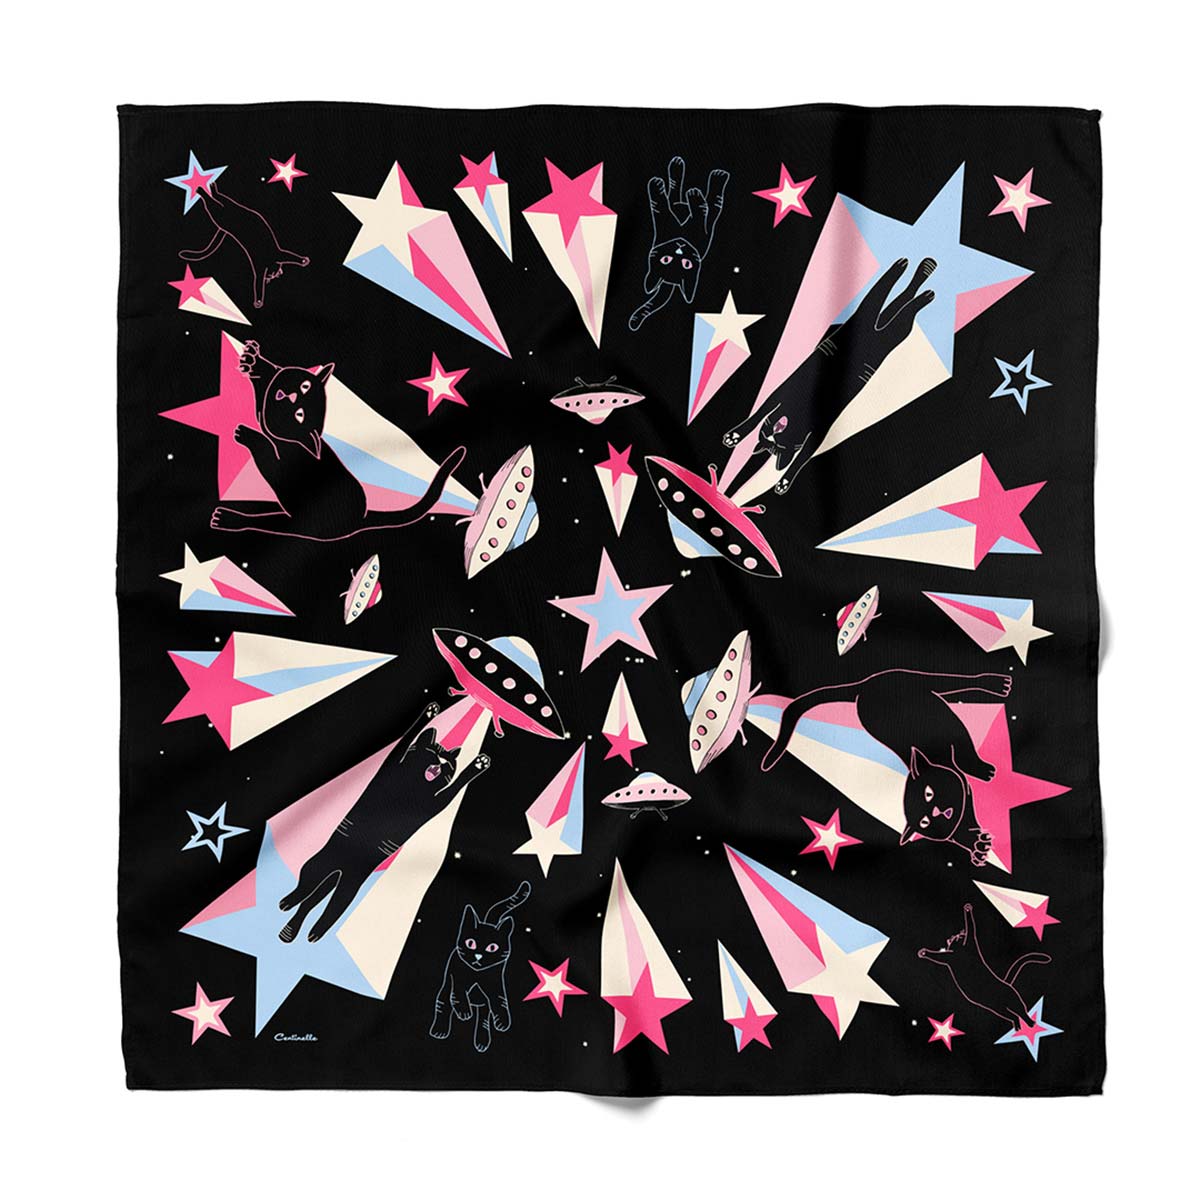 Neon stars and black cats on black silk bandana with spaceships.